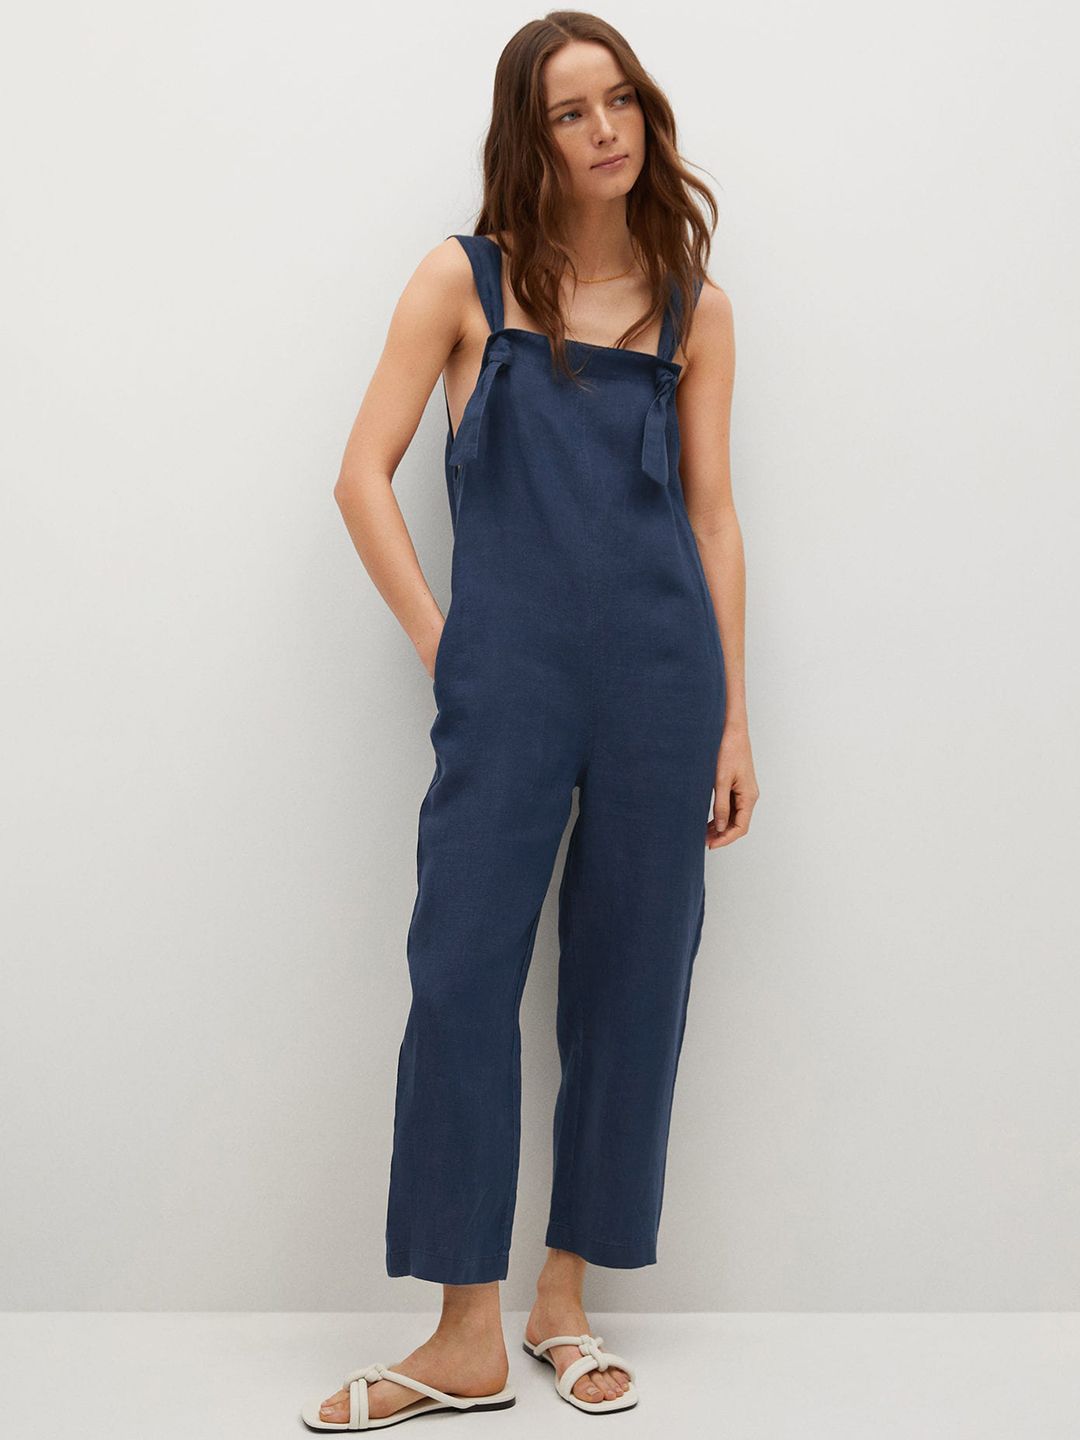 MANGO Navy Blue Solid Linen Basic Jumpsuit Price in India